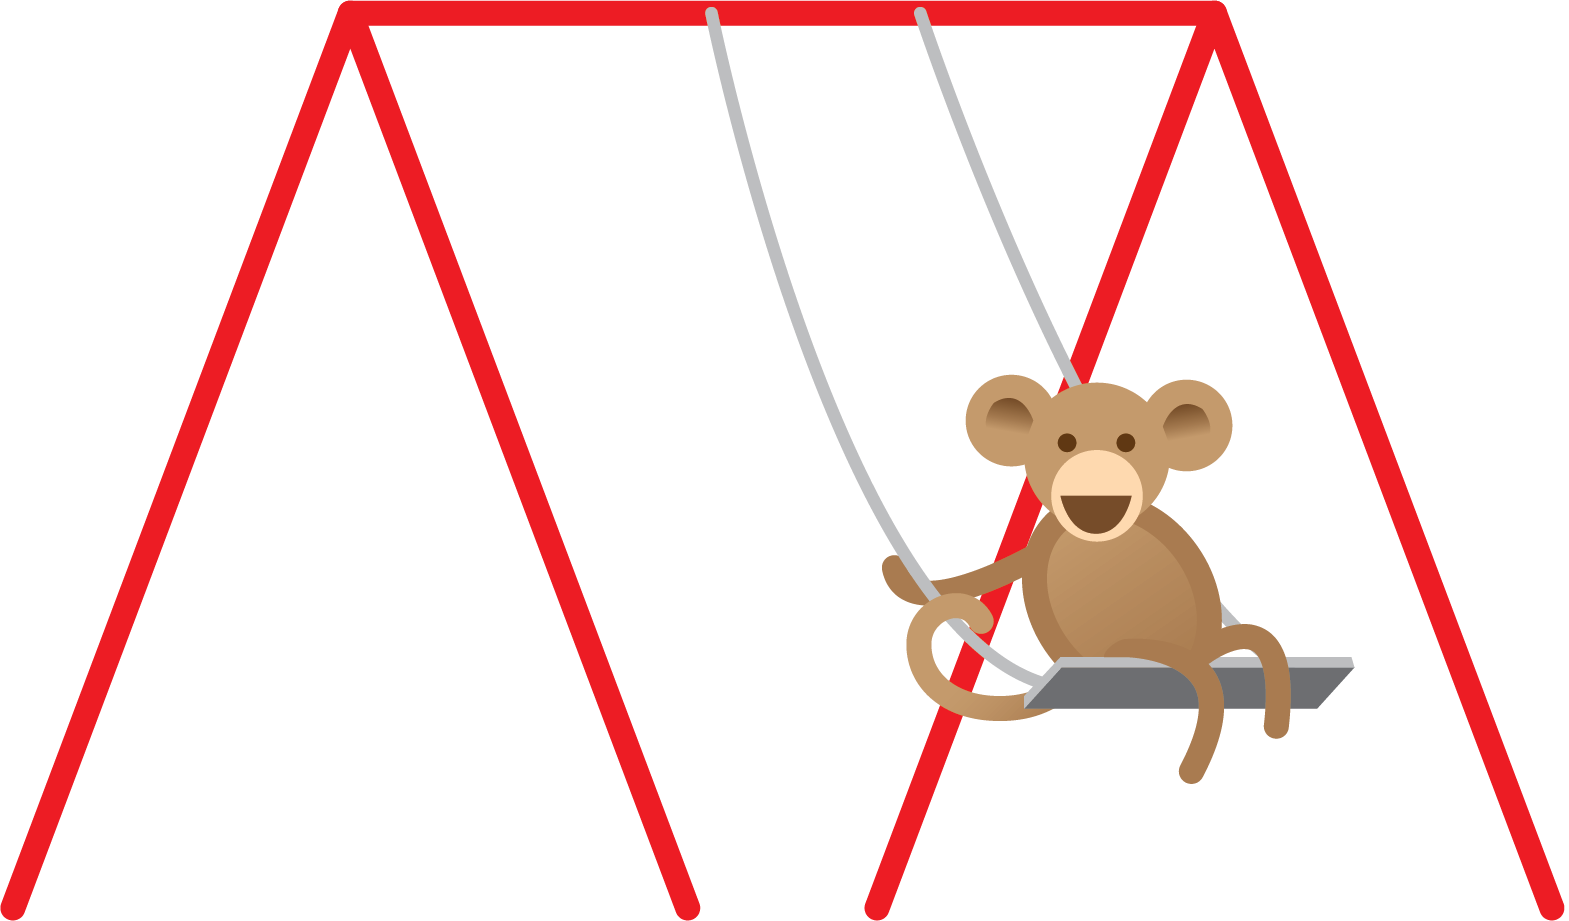 A monkey on a swing is rotated, not translated